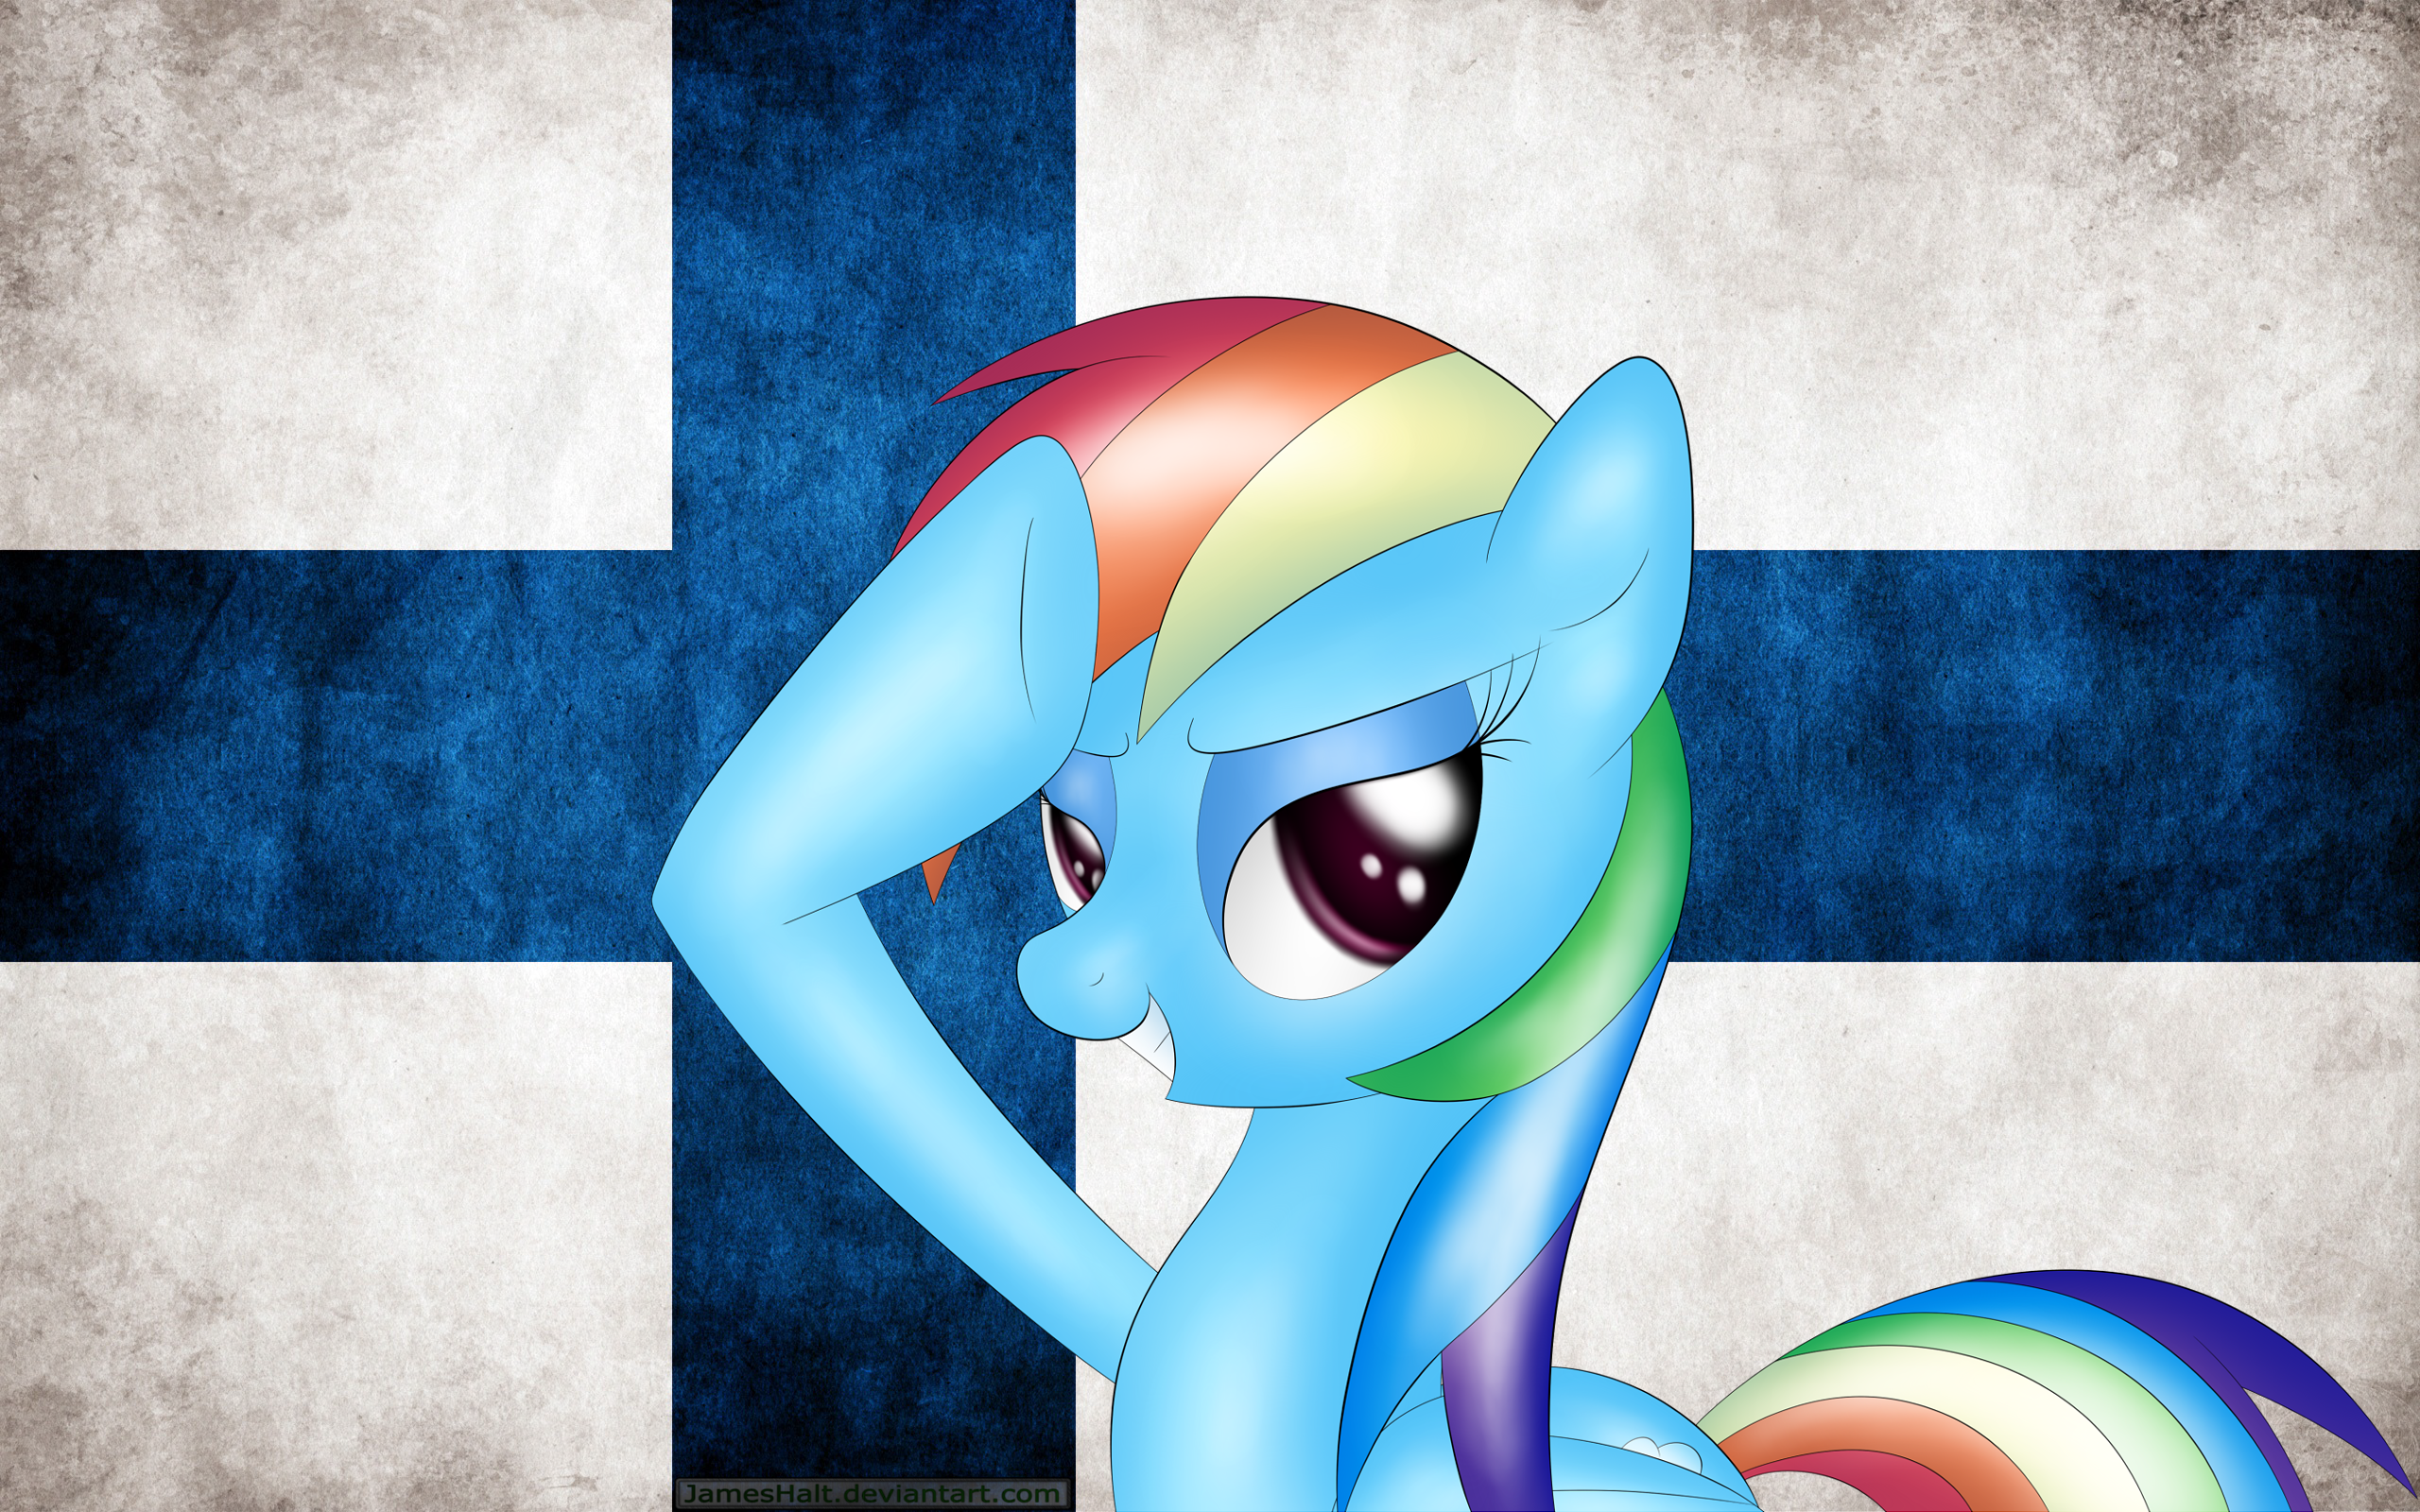 We salute Finland by JamesHalt and think0